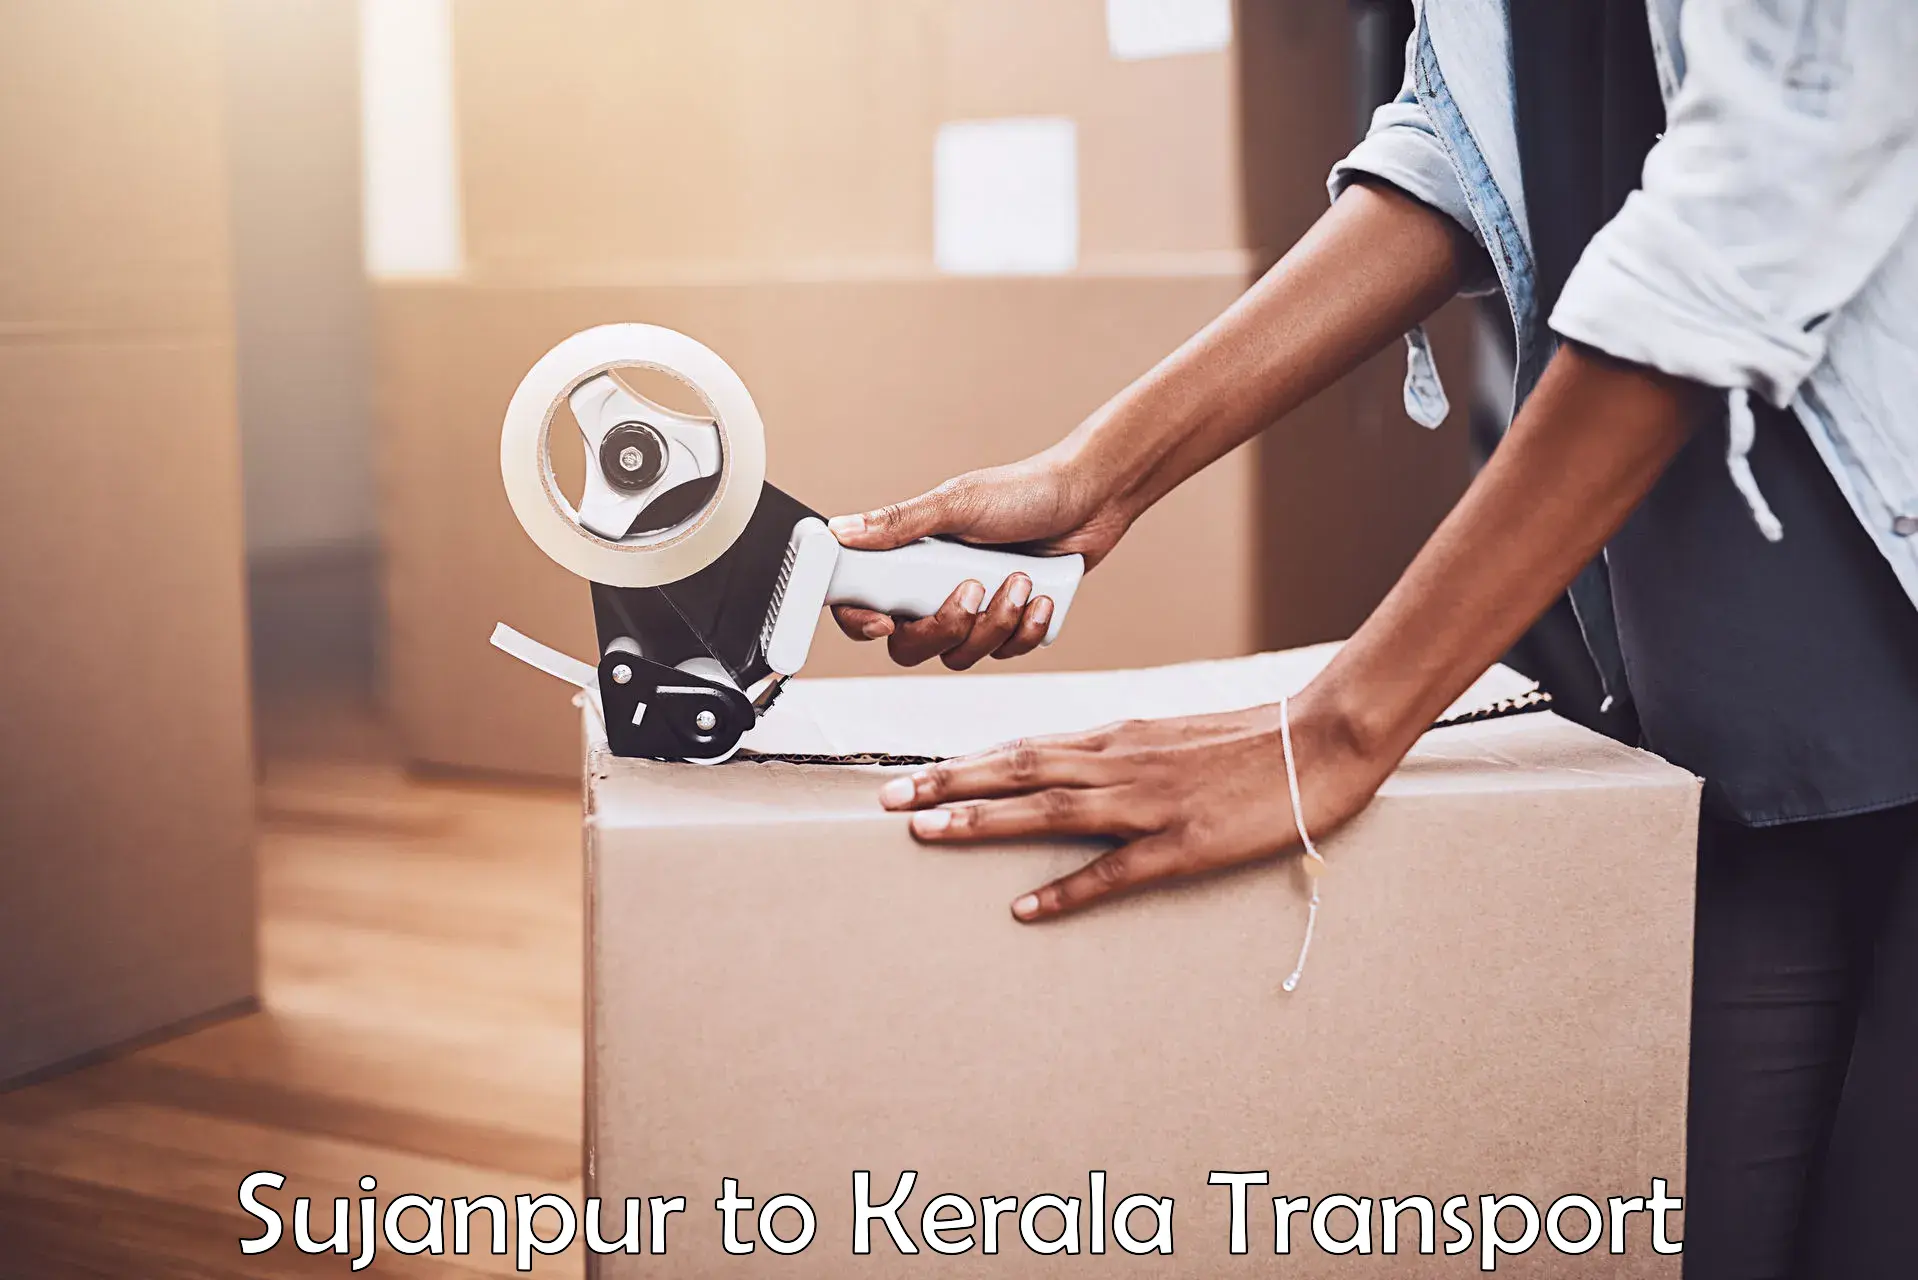 Commercial transport service Sujanpur to Thrissur